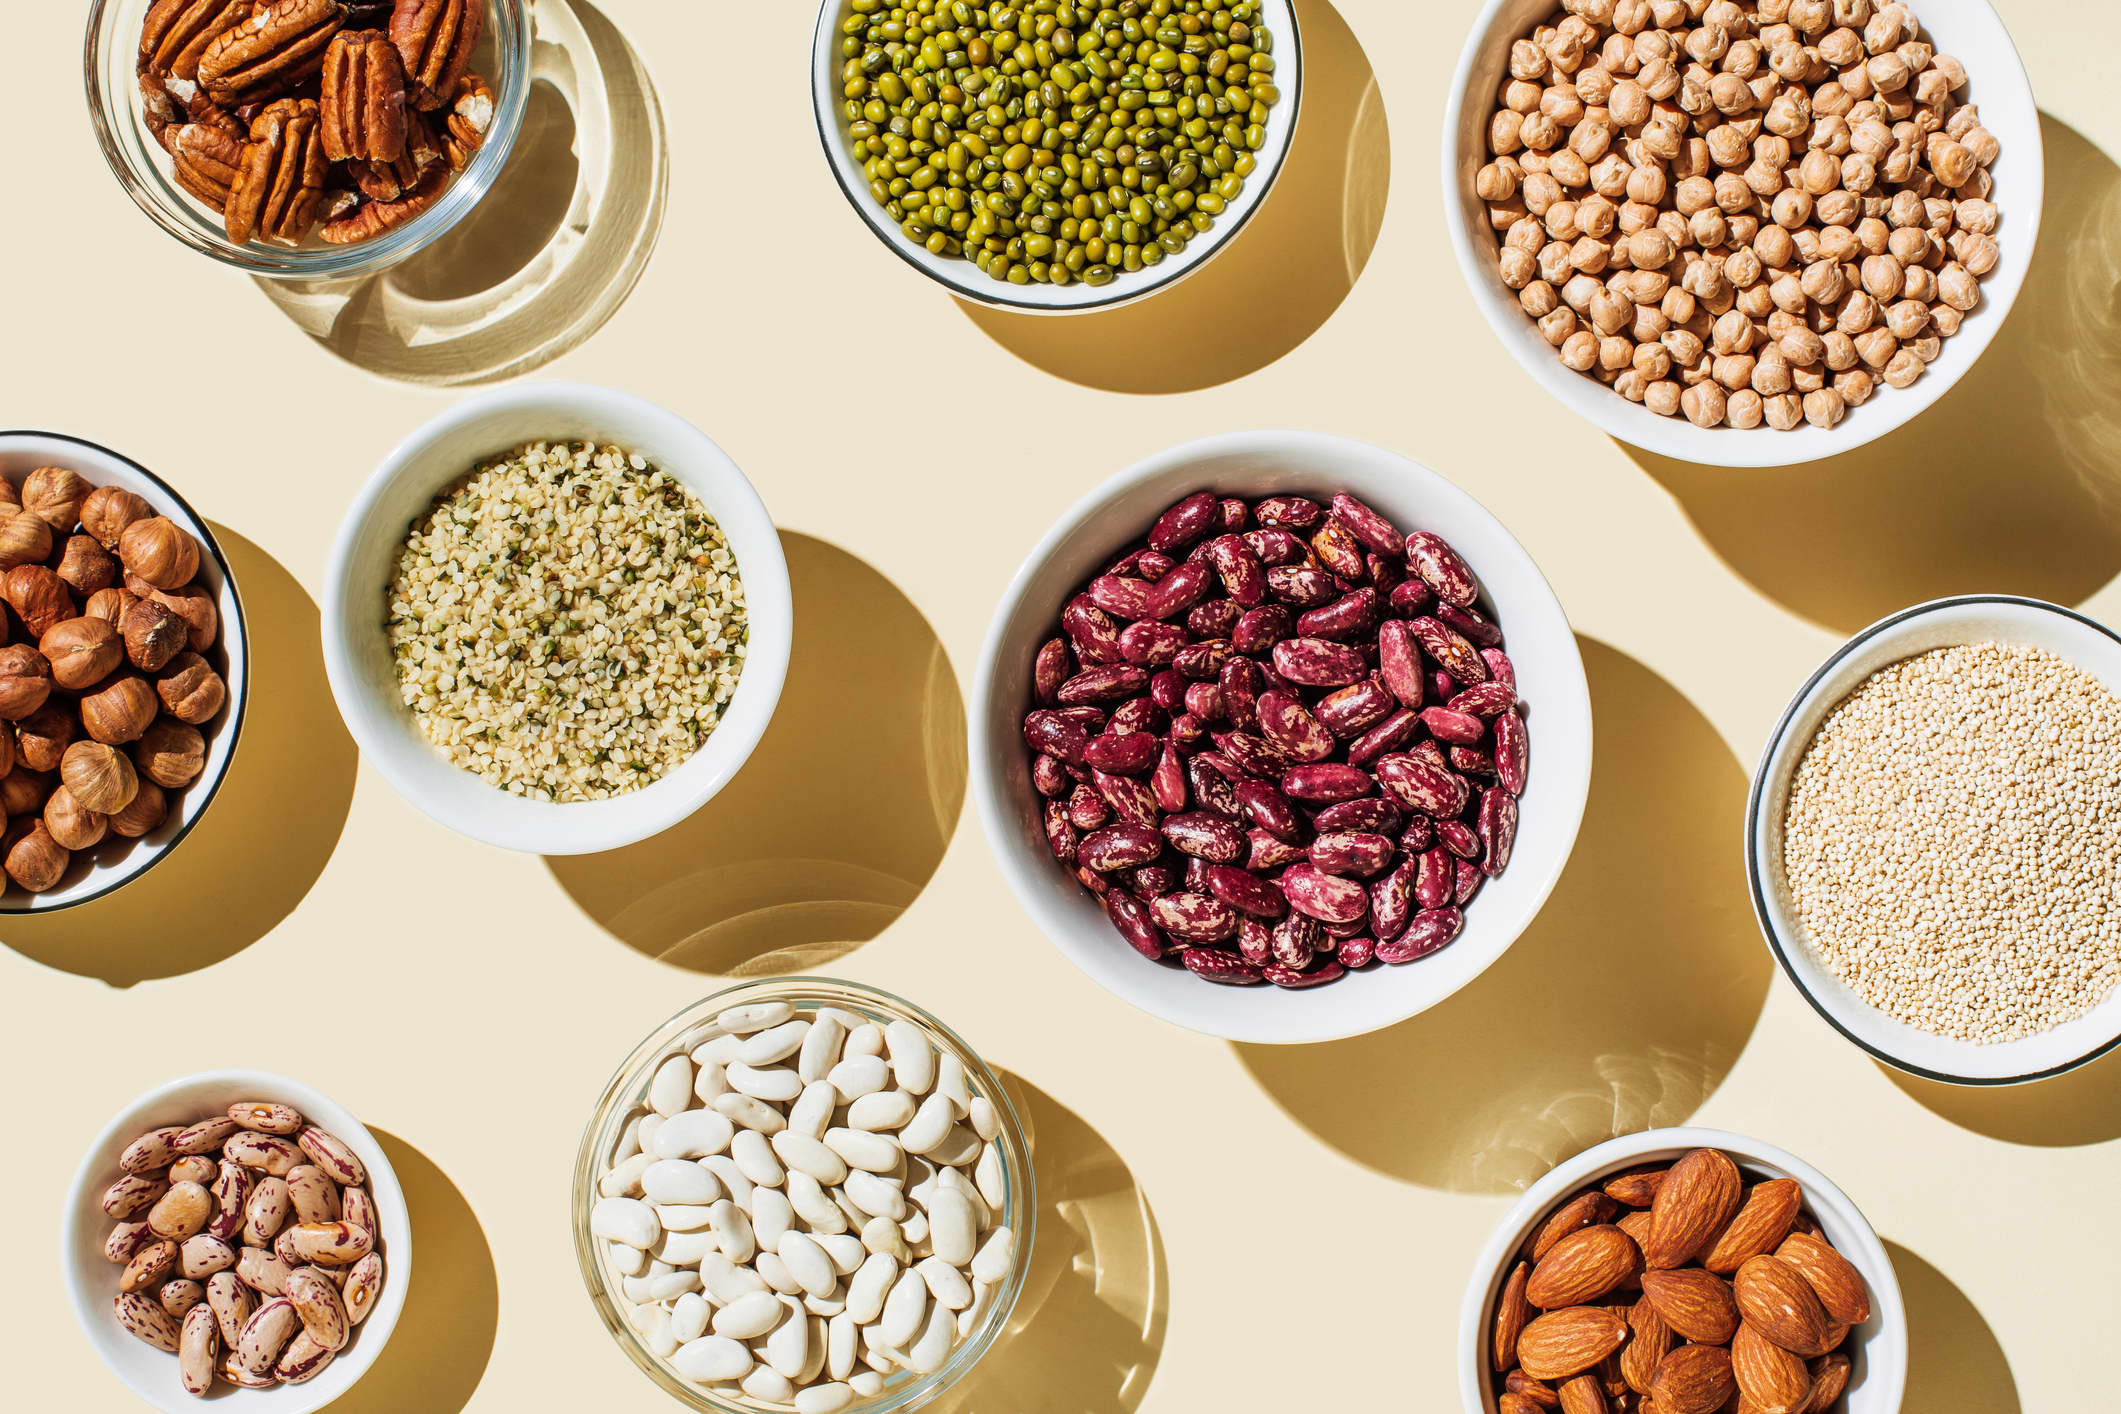 Fiber is one of the most important and overlooked nutrients, the doctor says